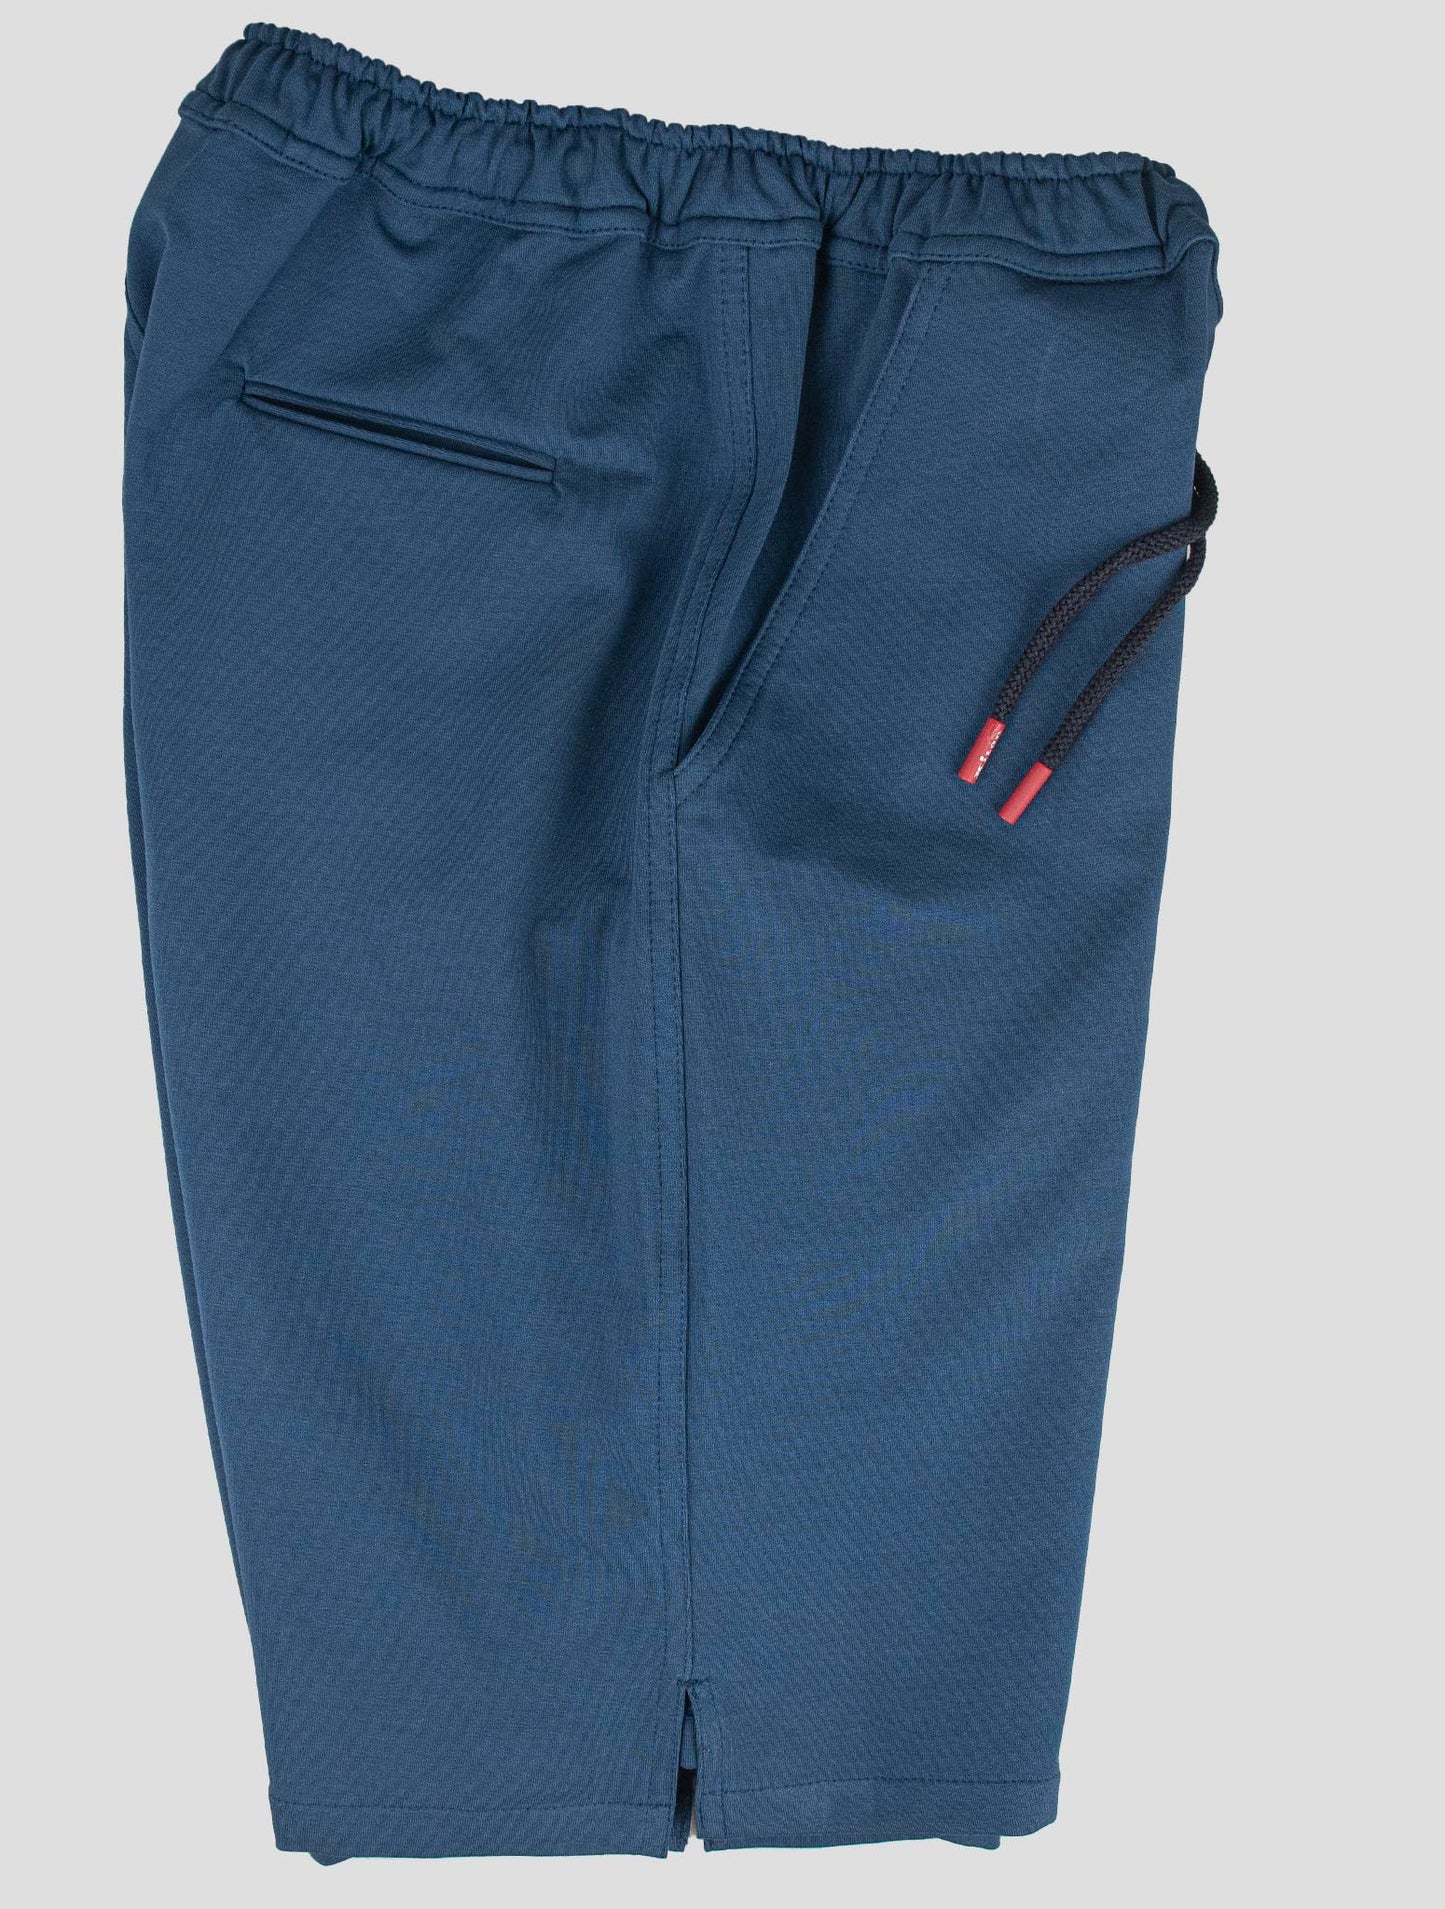 Kiton Matching Outfit - Blue Mariano and Blue Short Pants Tracksuit